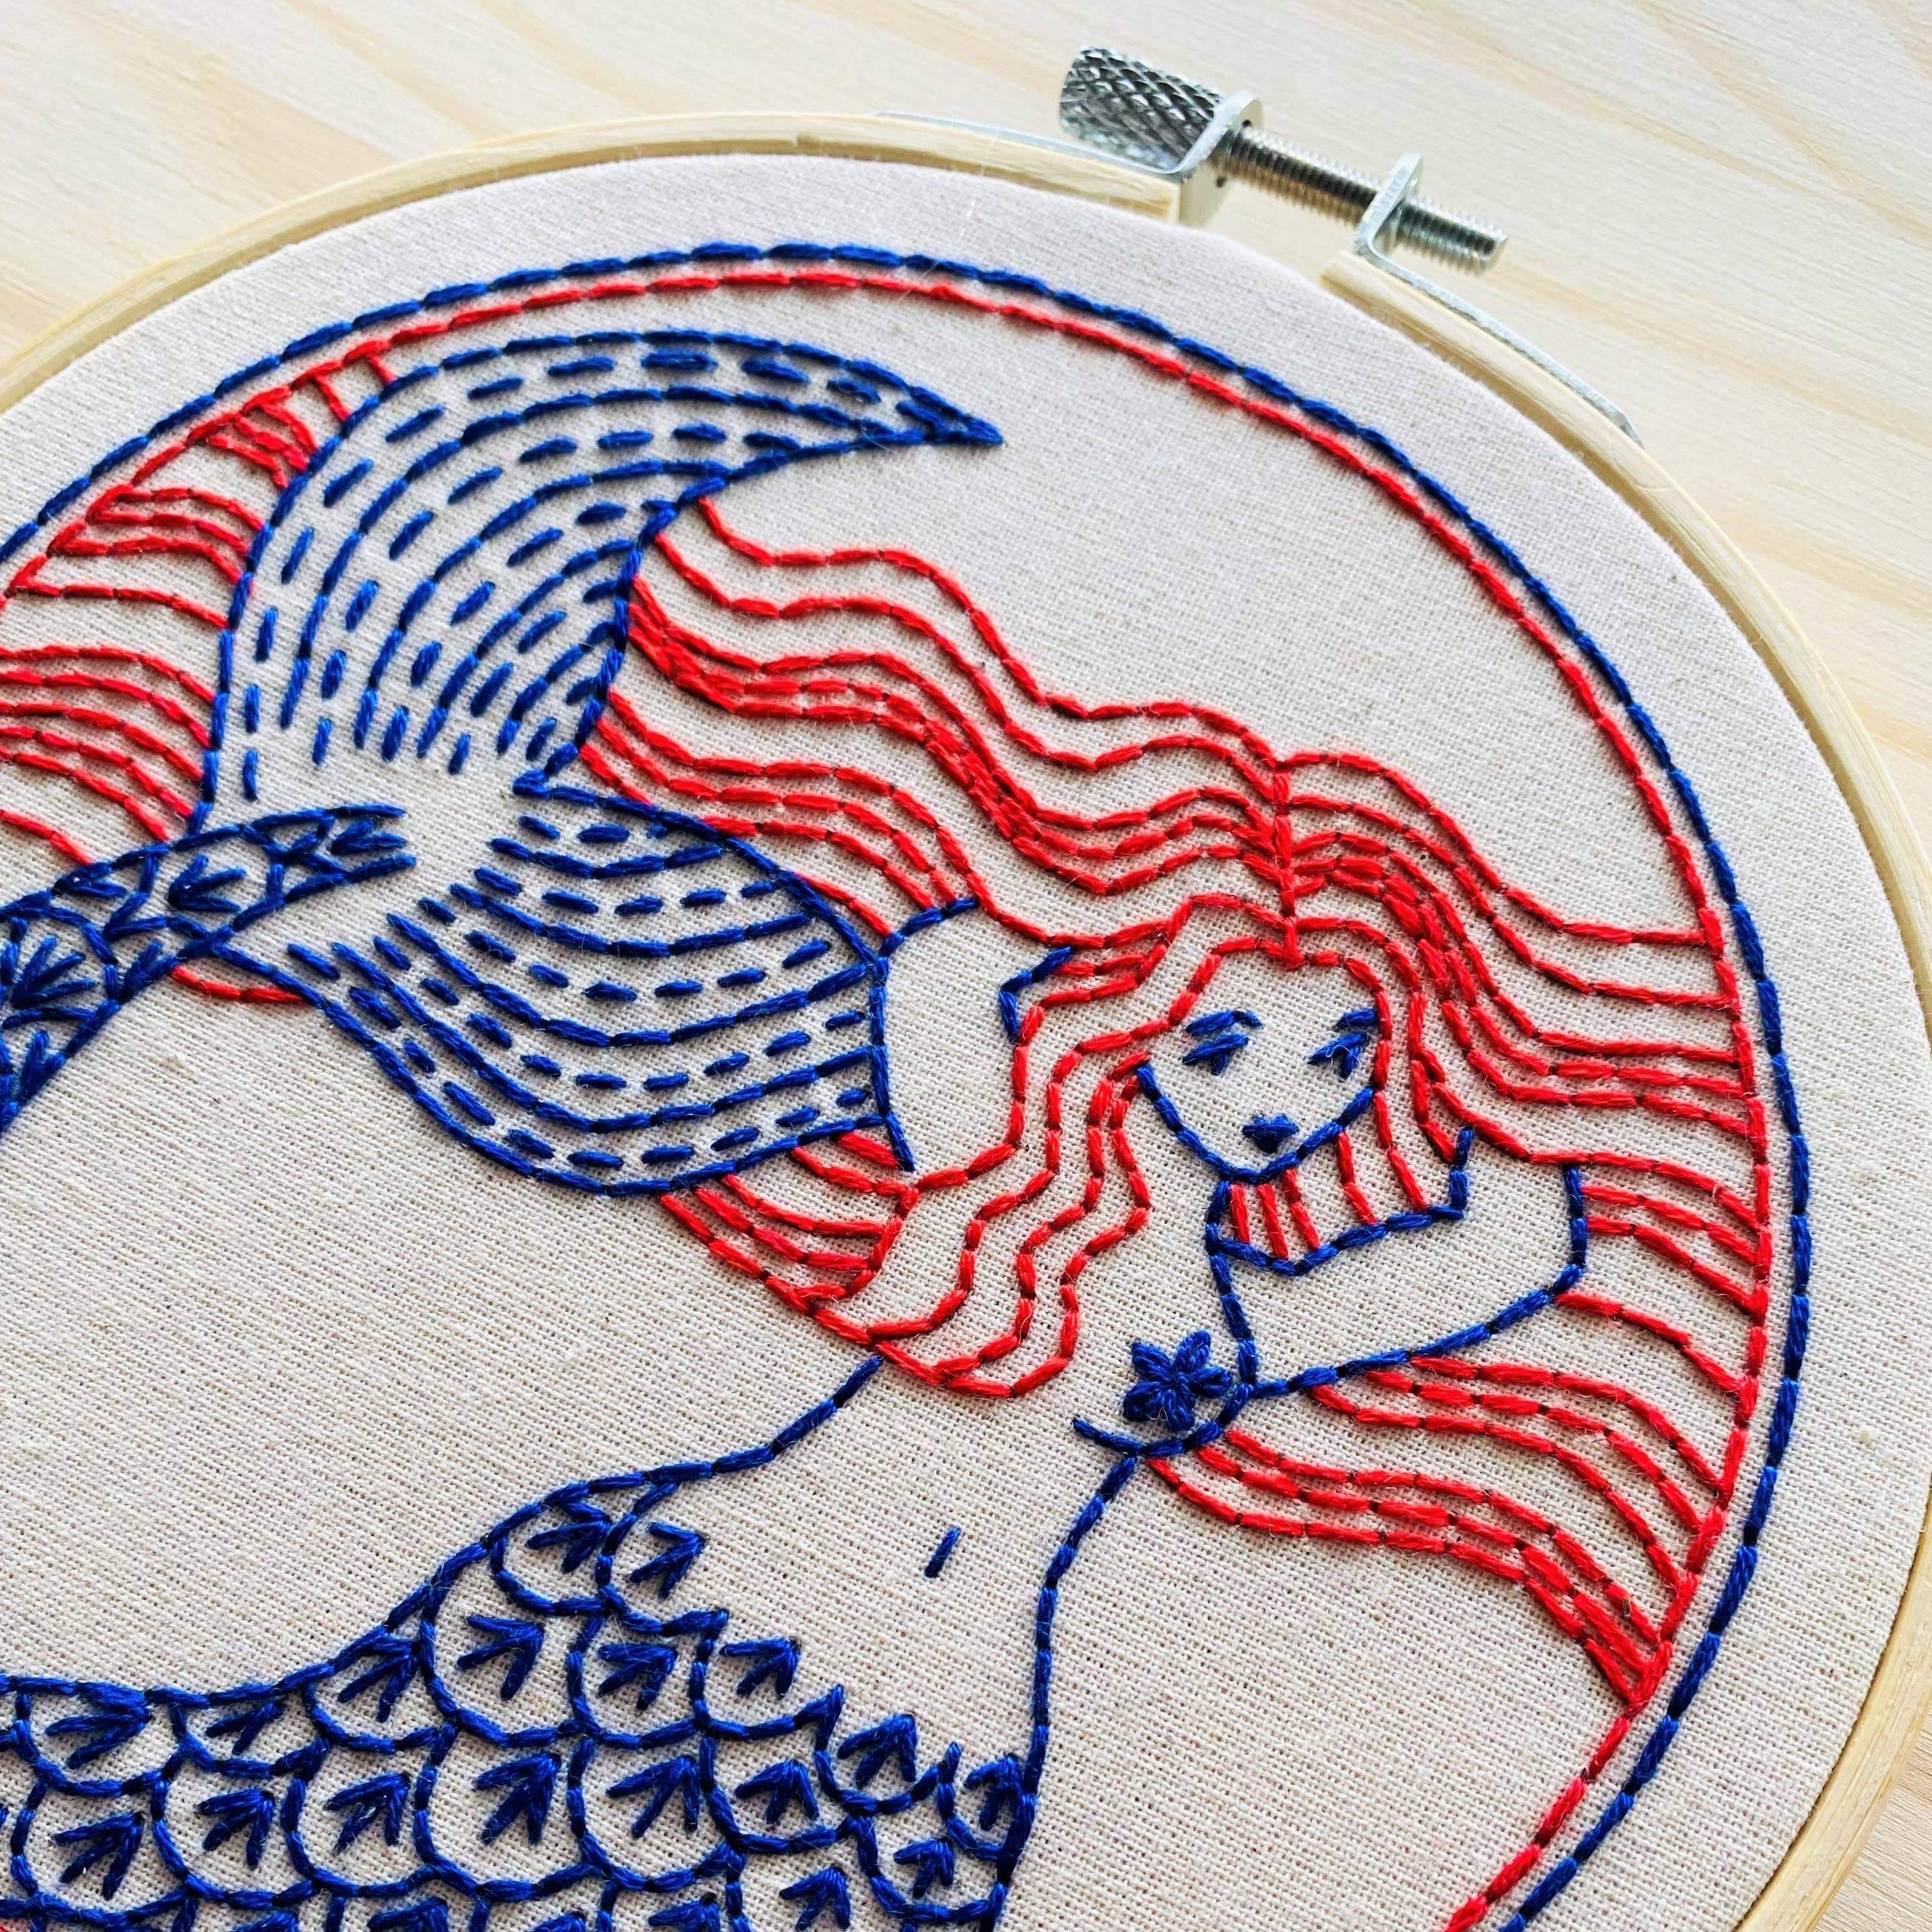 Hand embroidery kit for beginners Mermaid Cat